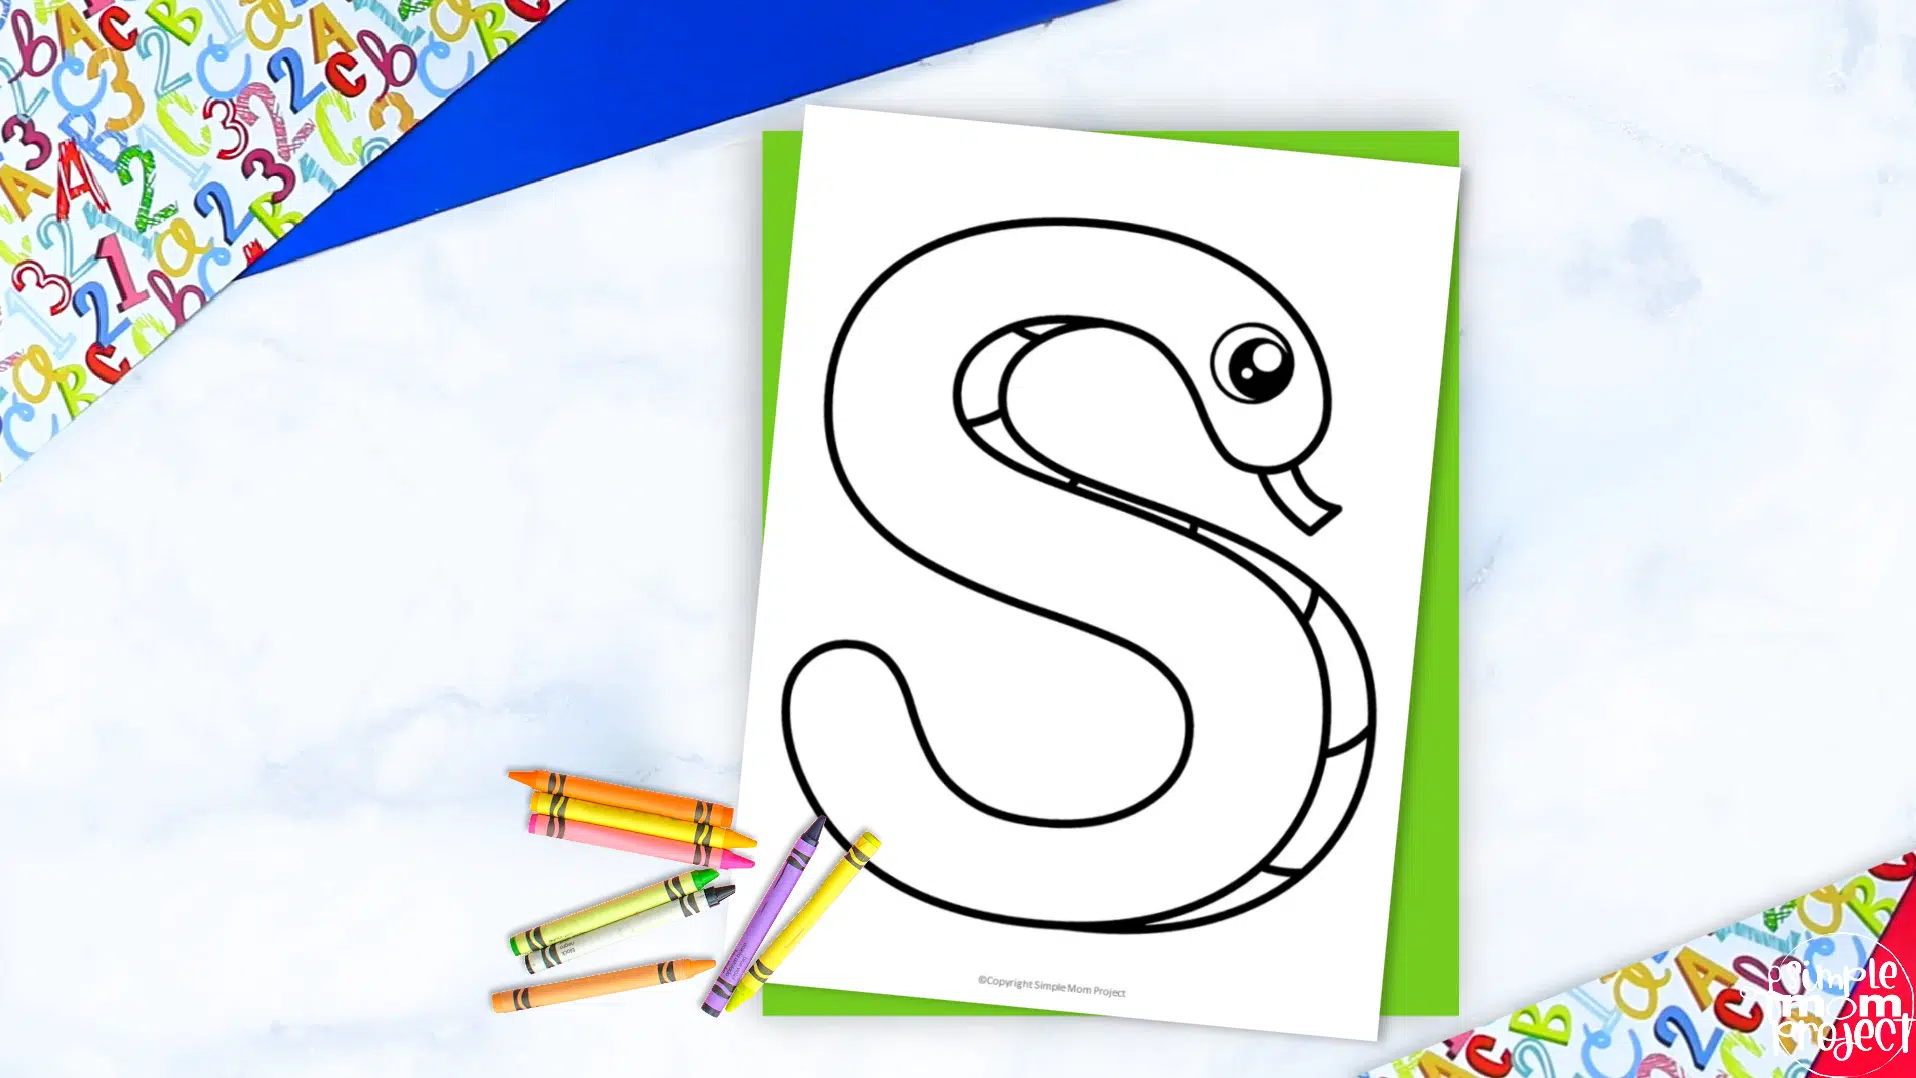 Free printable letter s coloring page â simple mom project